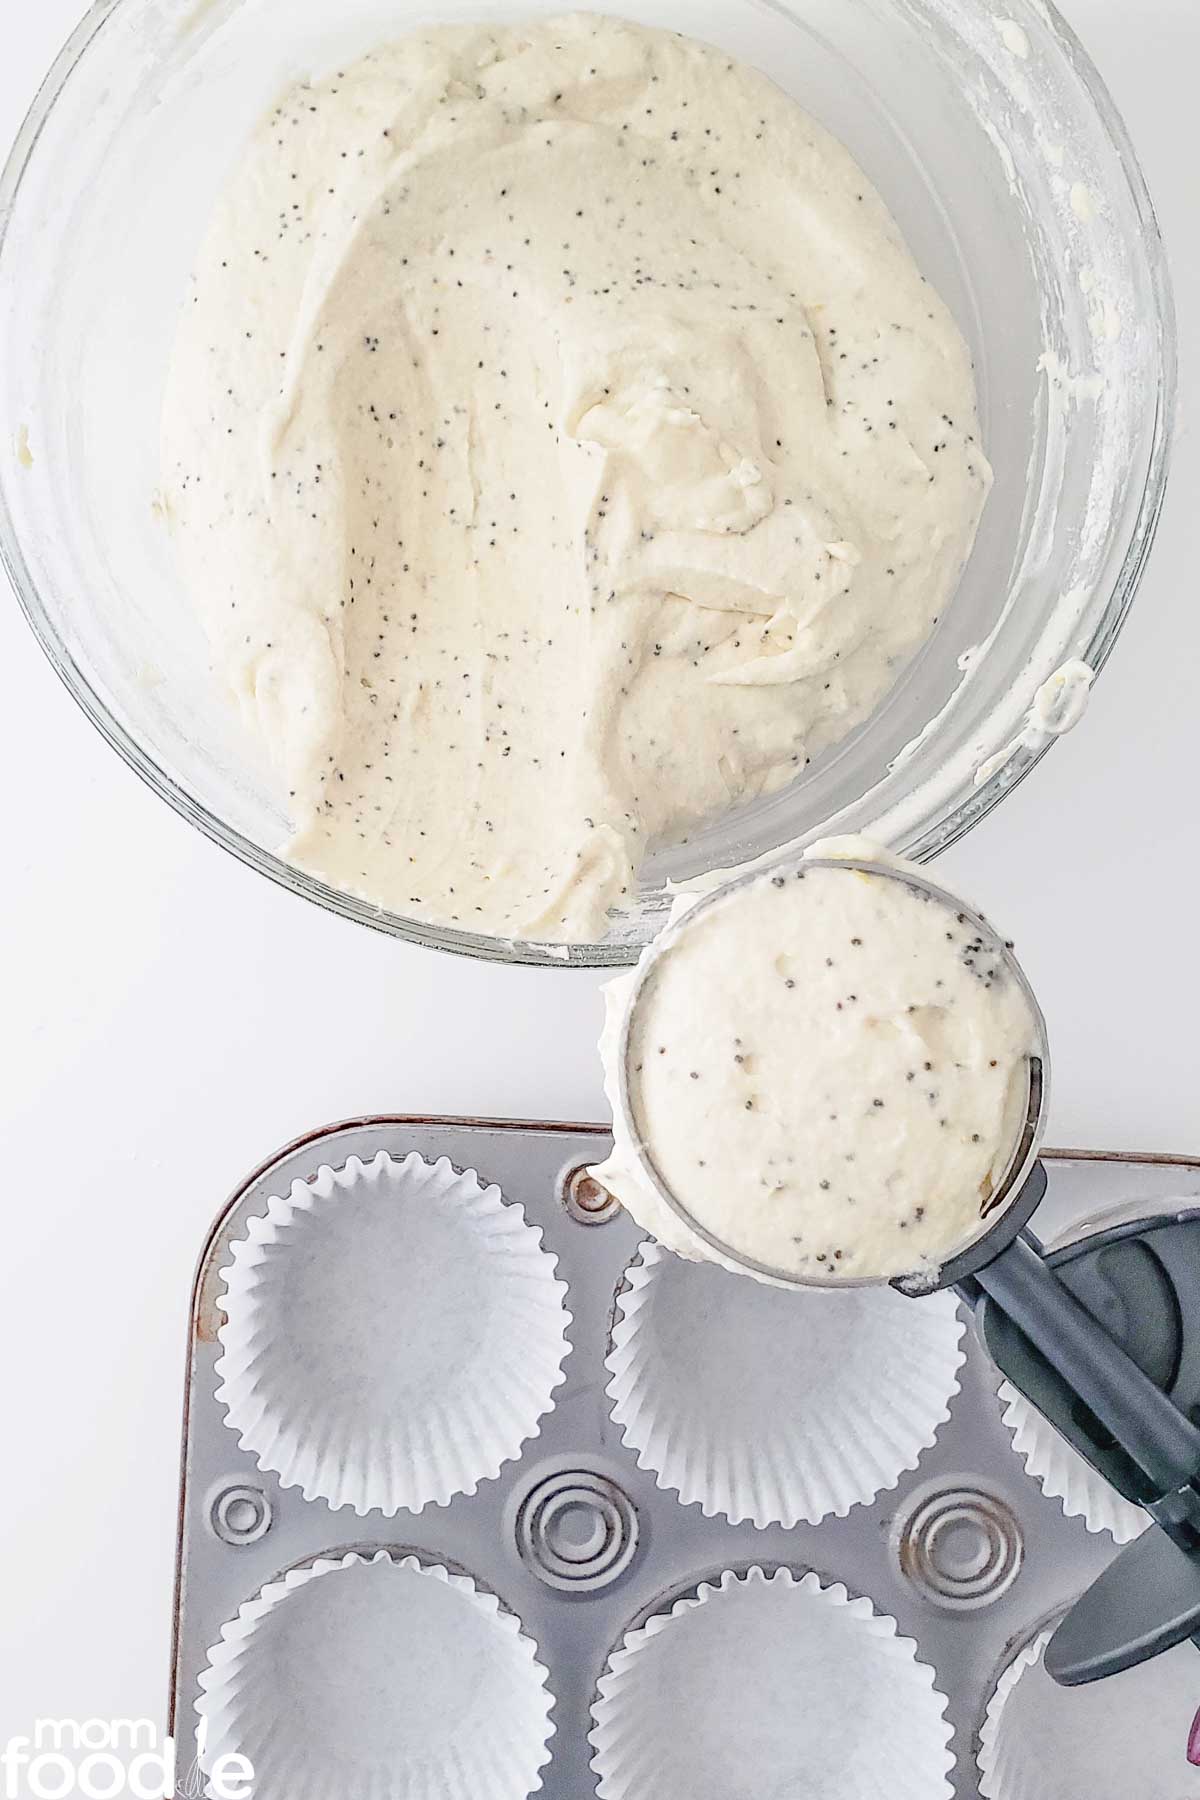 scooping lemon poppy seed muffin batter into cupcake liners